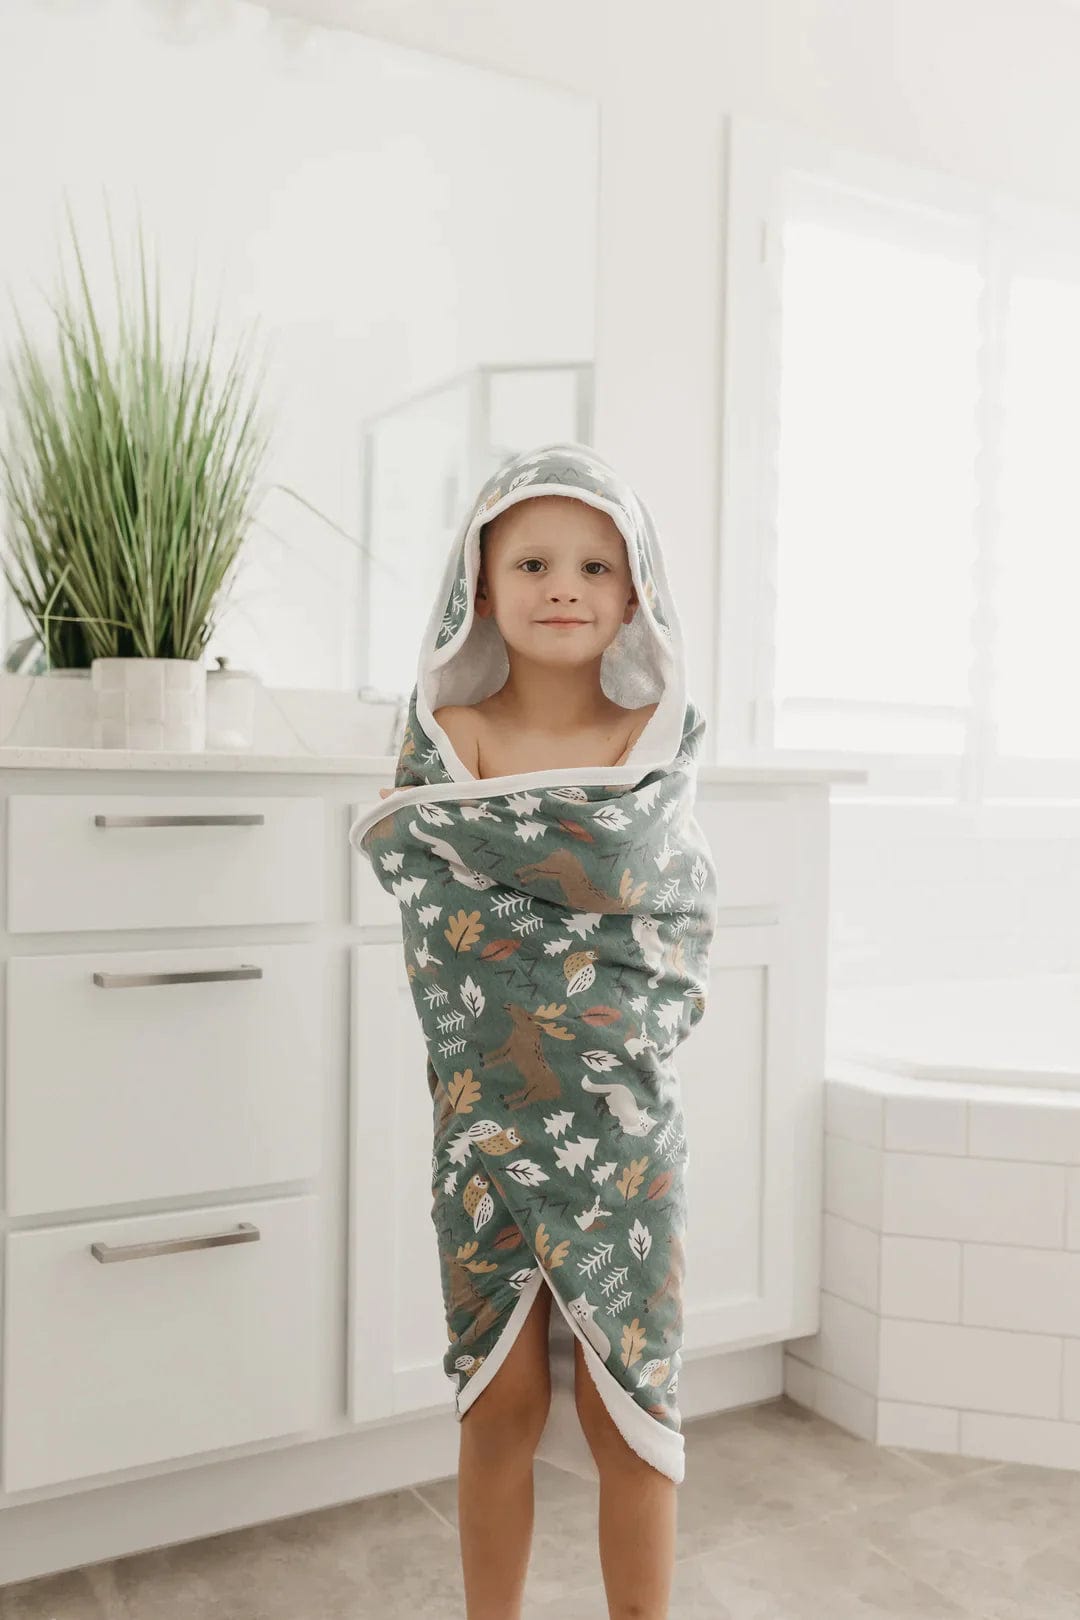 Copper Pearl Towel Atwood Knit Hooded Towel